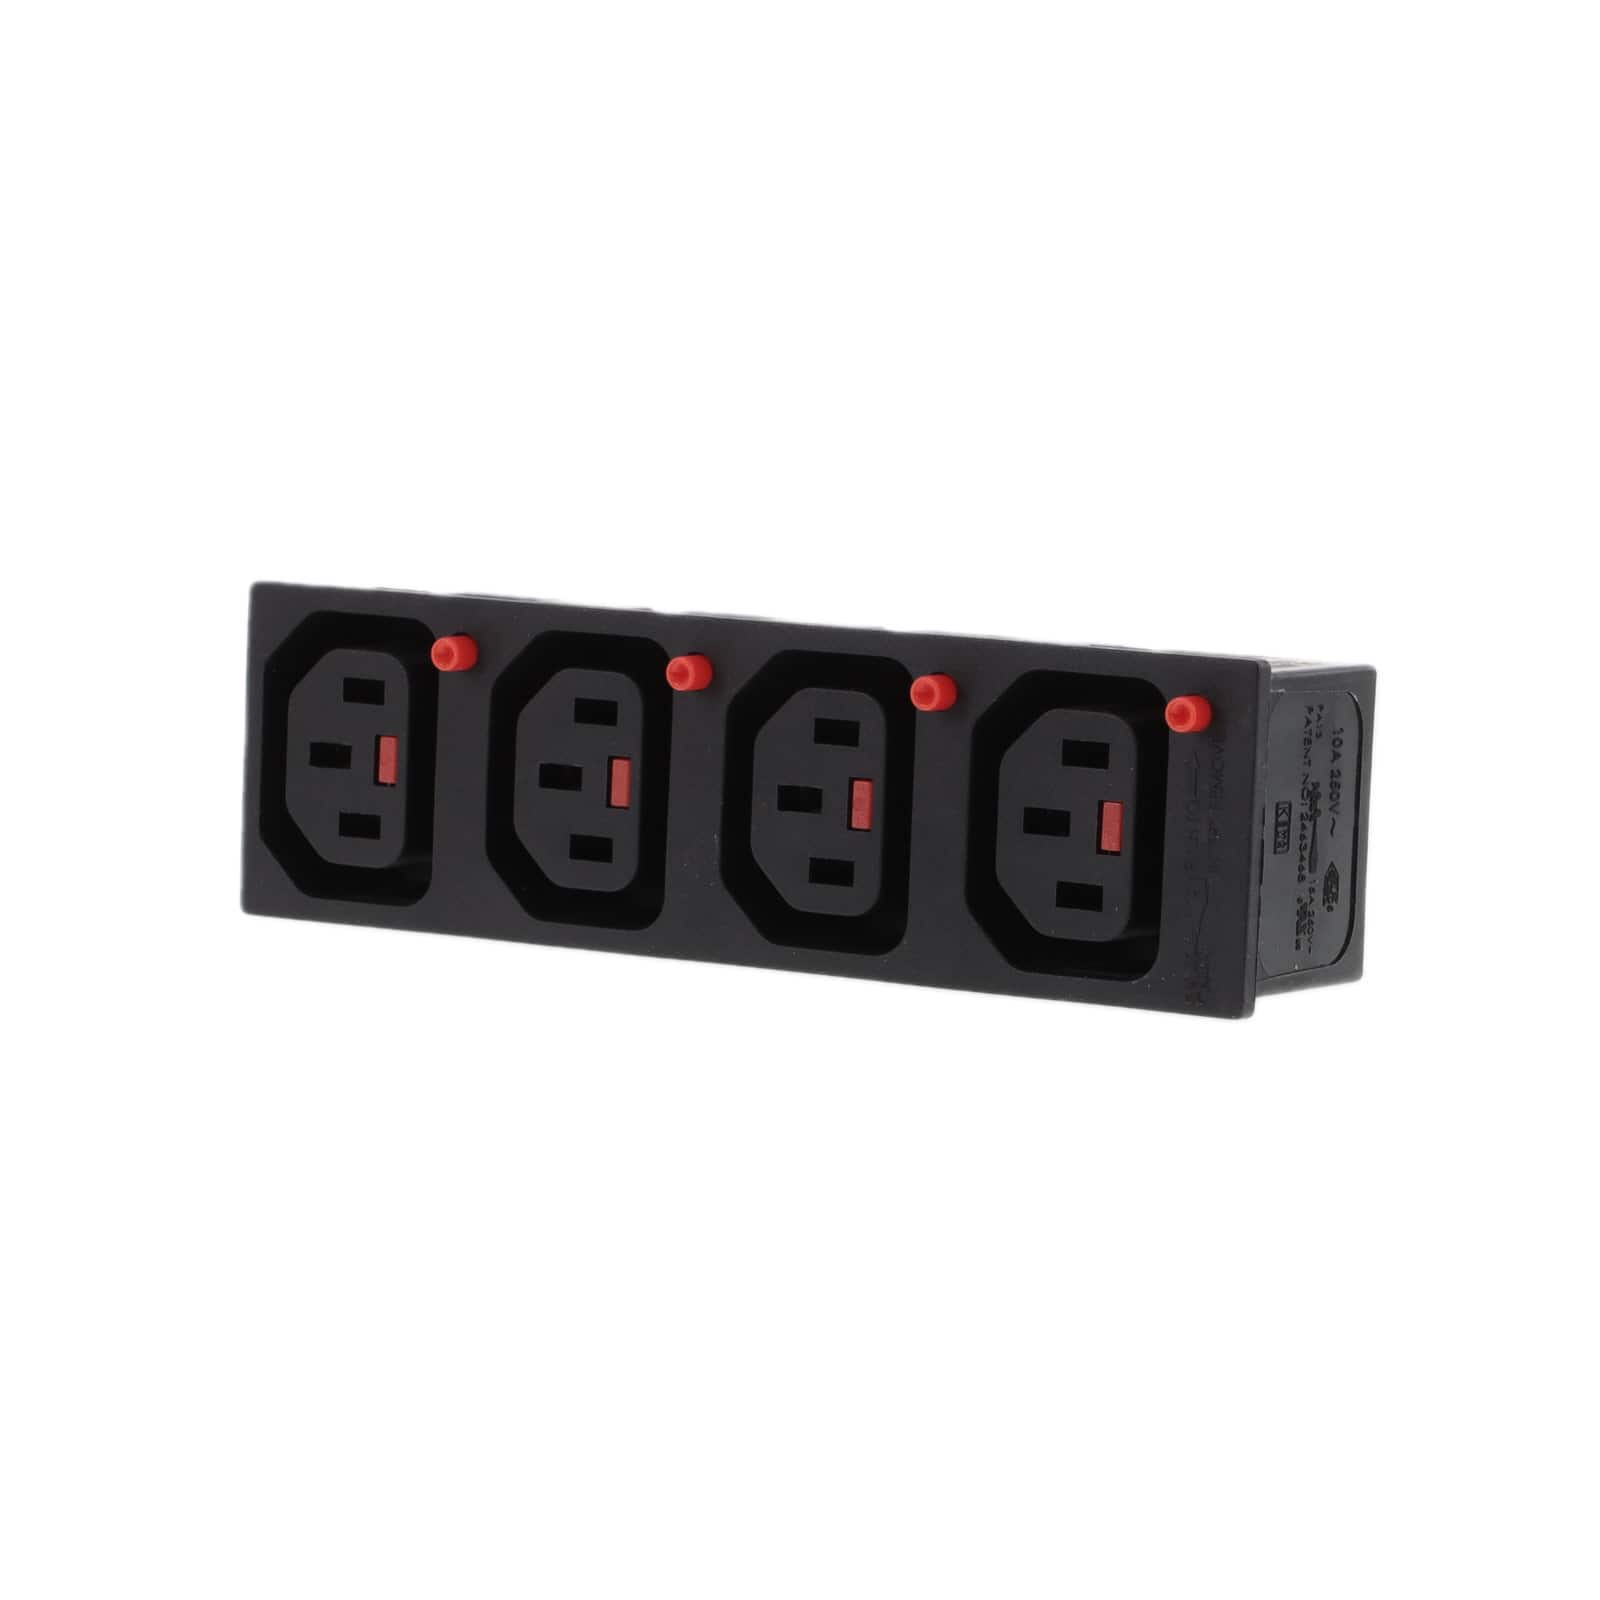 C13-4 TIER-LOCKING OUTLET